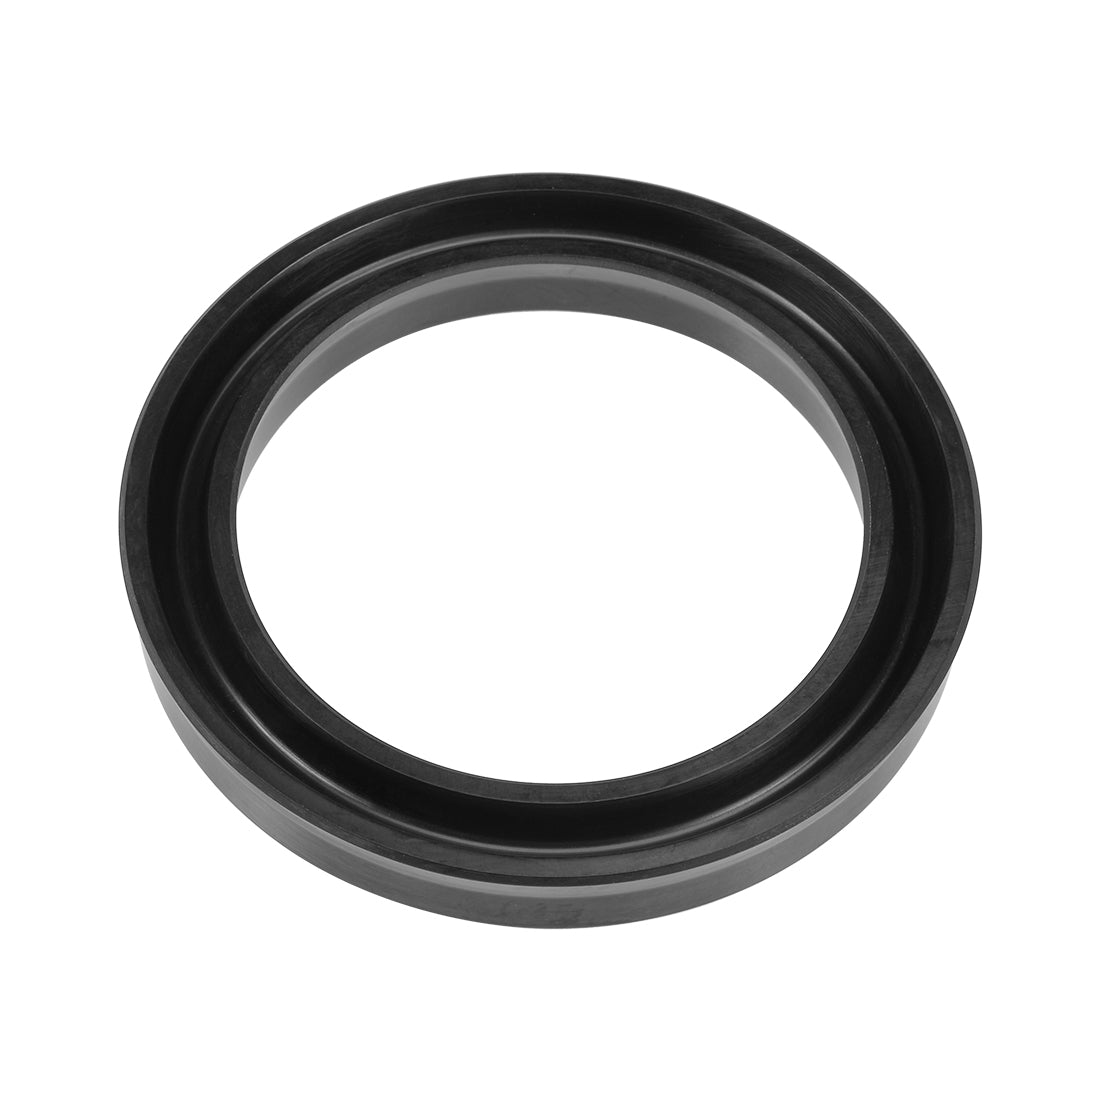 Uxcell Uxcell Hydraulic Seal, Piston Shaft UPH Oil Sealing O-Ring, 65mm x 84.5mm x 12mm